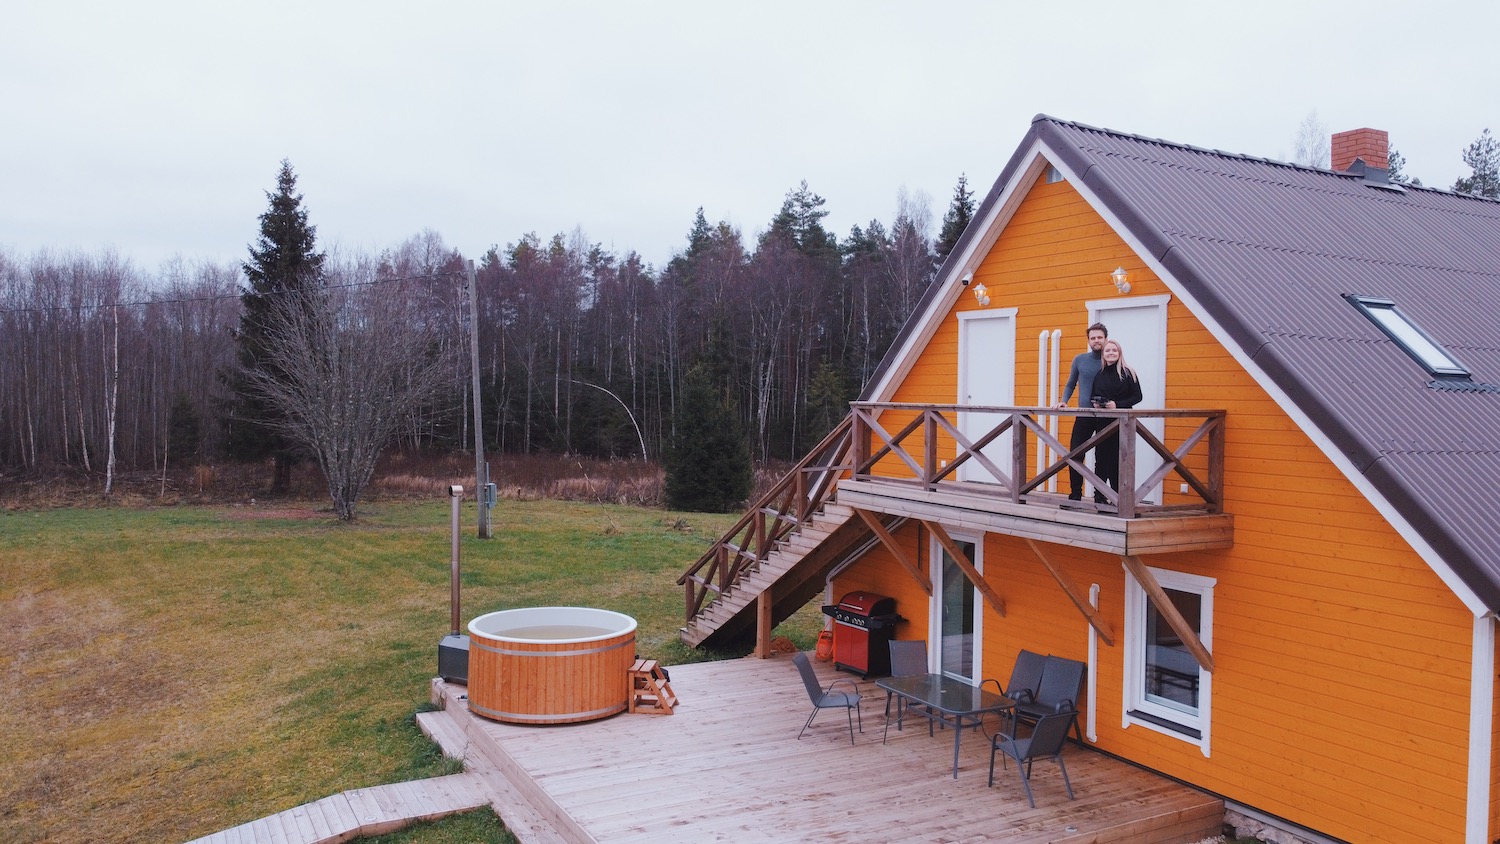 Pihlaka hunting cabin in Estonia the best scenic holiday homes in the middle of the nature, Eesti Paigad